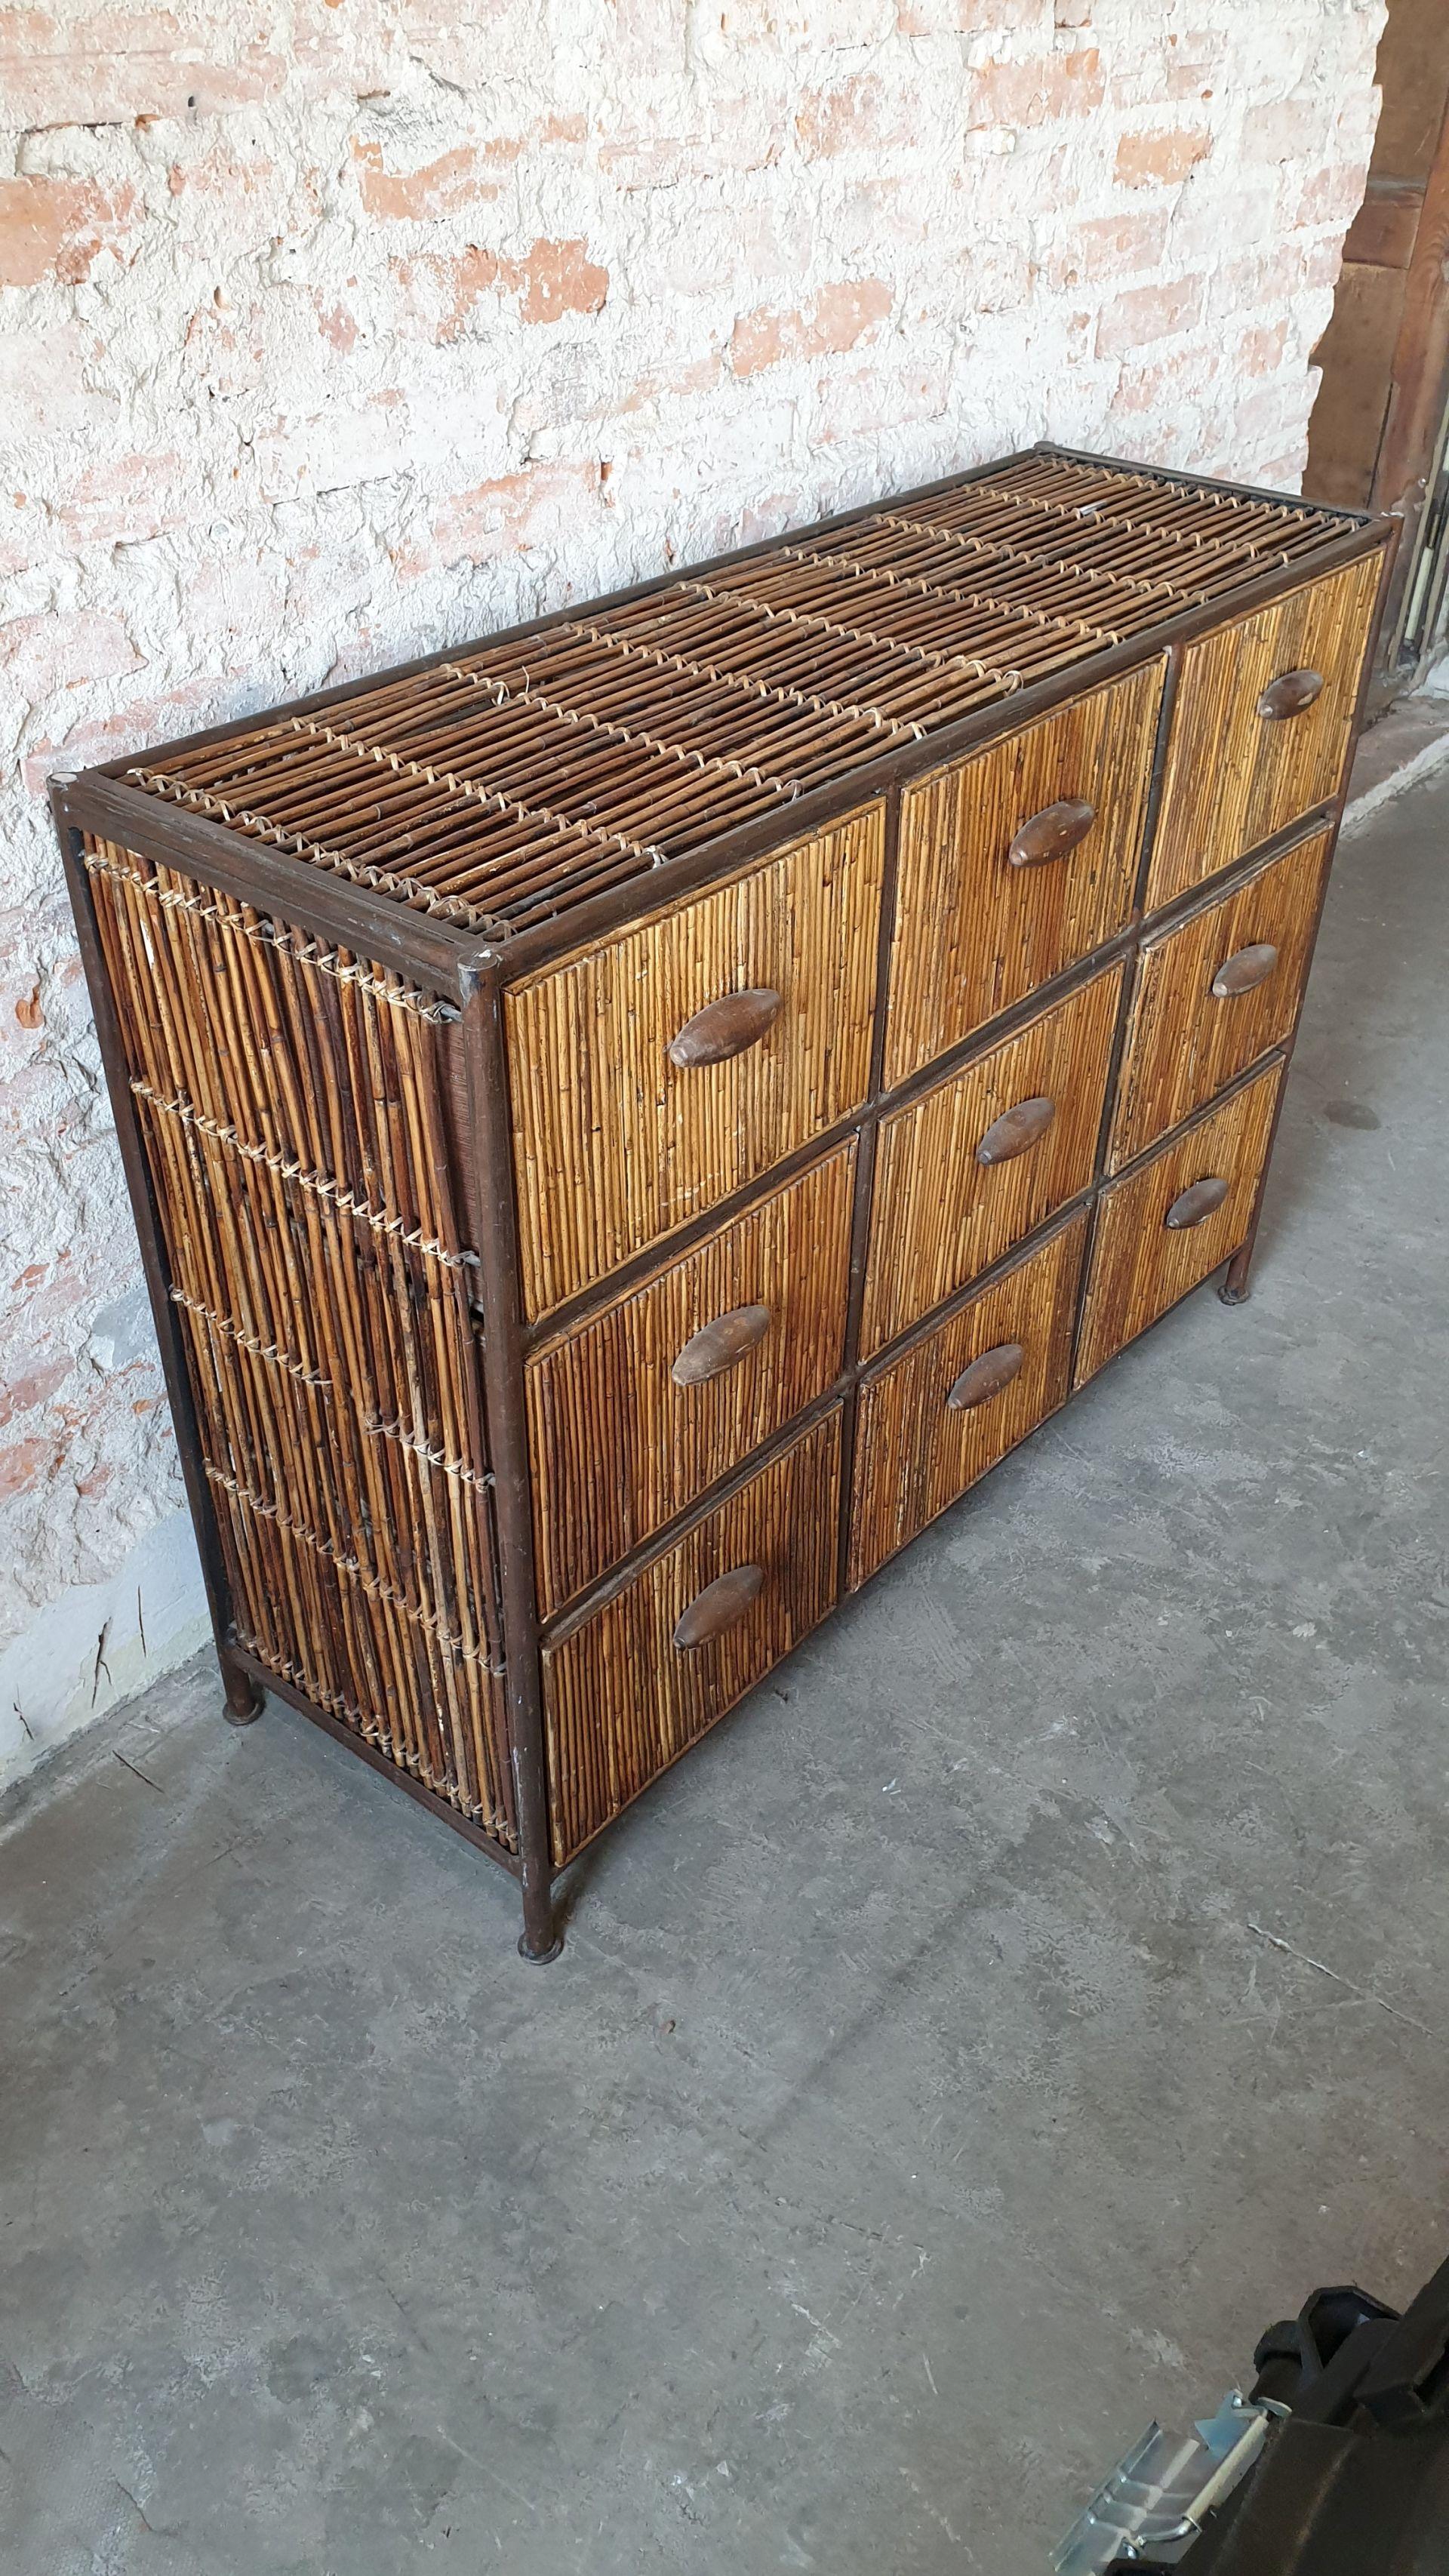 Detailed condition:
— This vintage item has no defects, but it may show slight traces of use.

Country of manufacture:
— South Africa

Measures: Height 90 cm
Width 120 cm
Depth 35 cm.